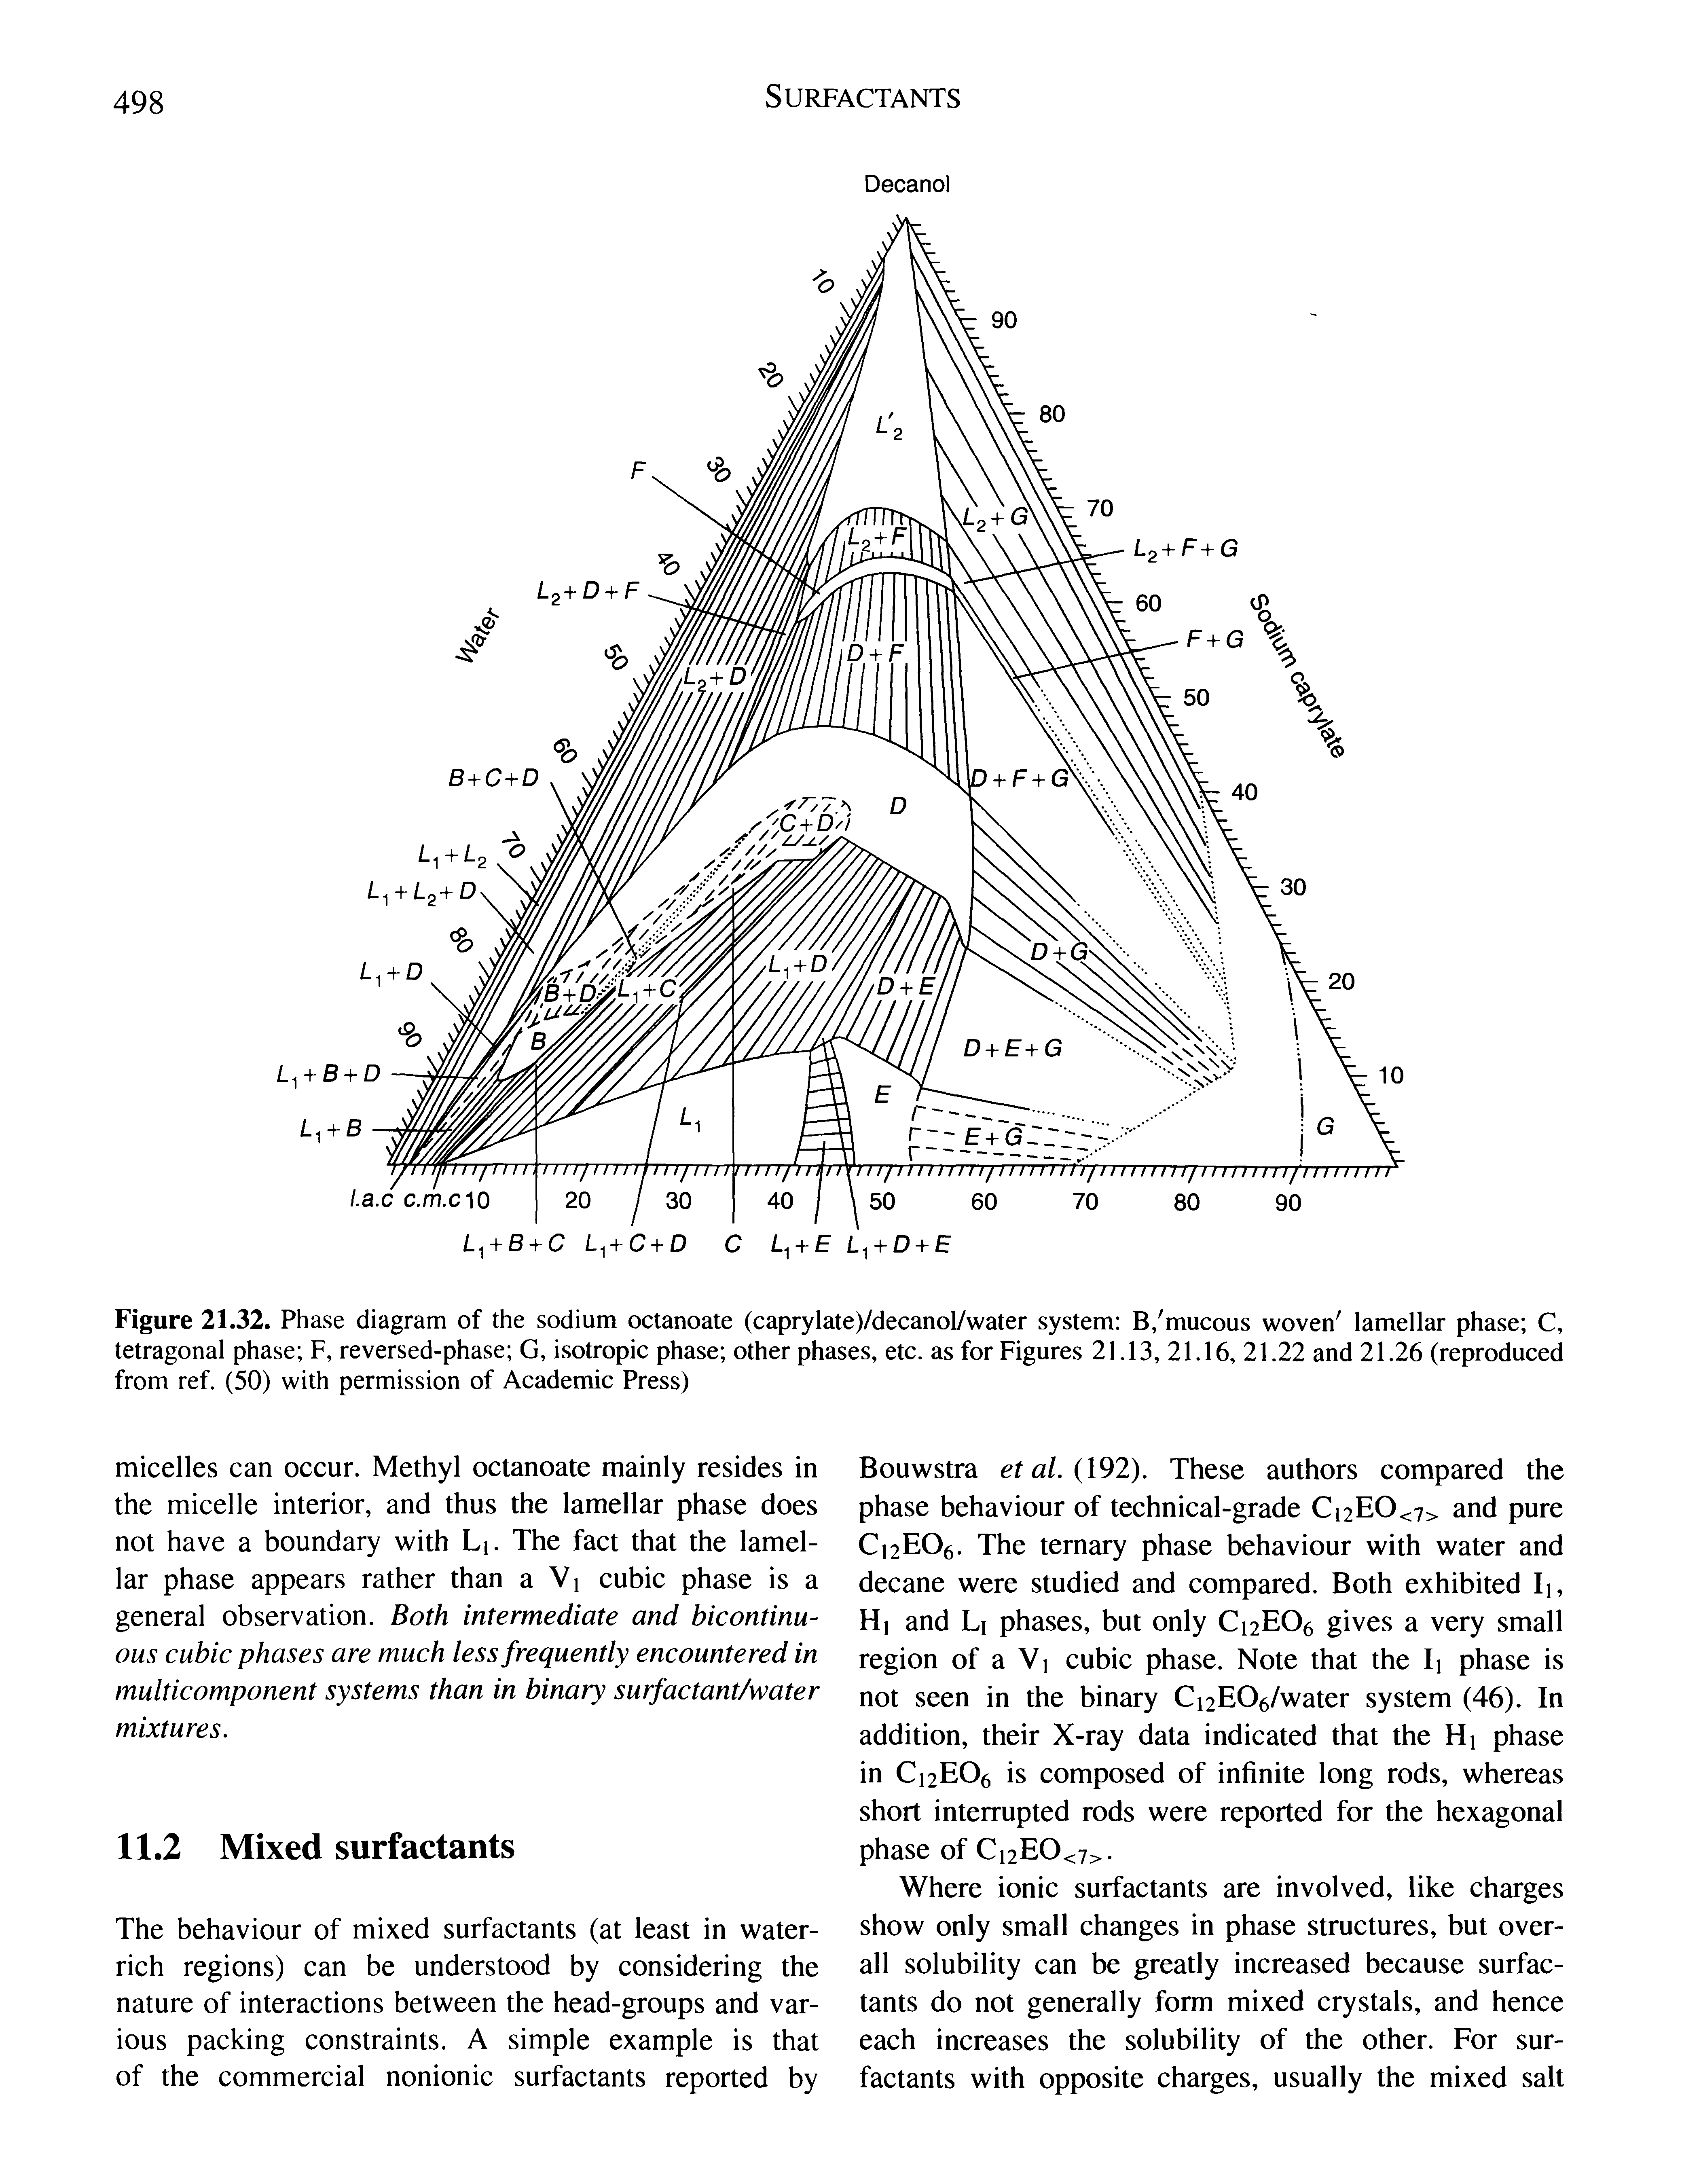 Figure 21.32. Phase diagram of the sodium octanoate (caprylate)/decanol/water system B/mucous woven lamellar phase C, tetragonal phase F, reversed-phase G, isotropic phase other phases, etc. as for Figures 21.13, 21.16, 21.22 and 21.26 (reproduced from ref. (50) with permission of Academic Press)...